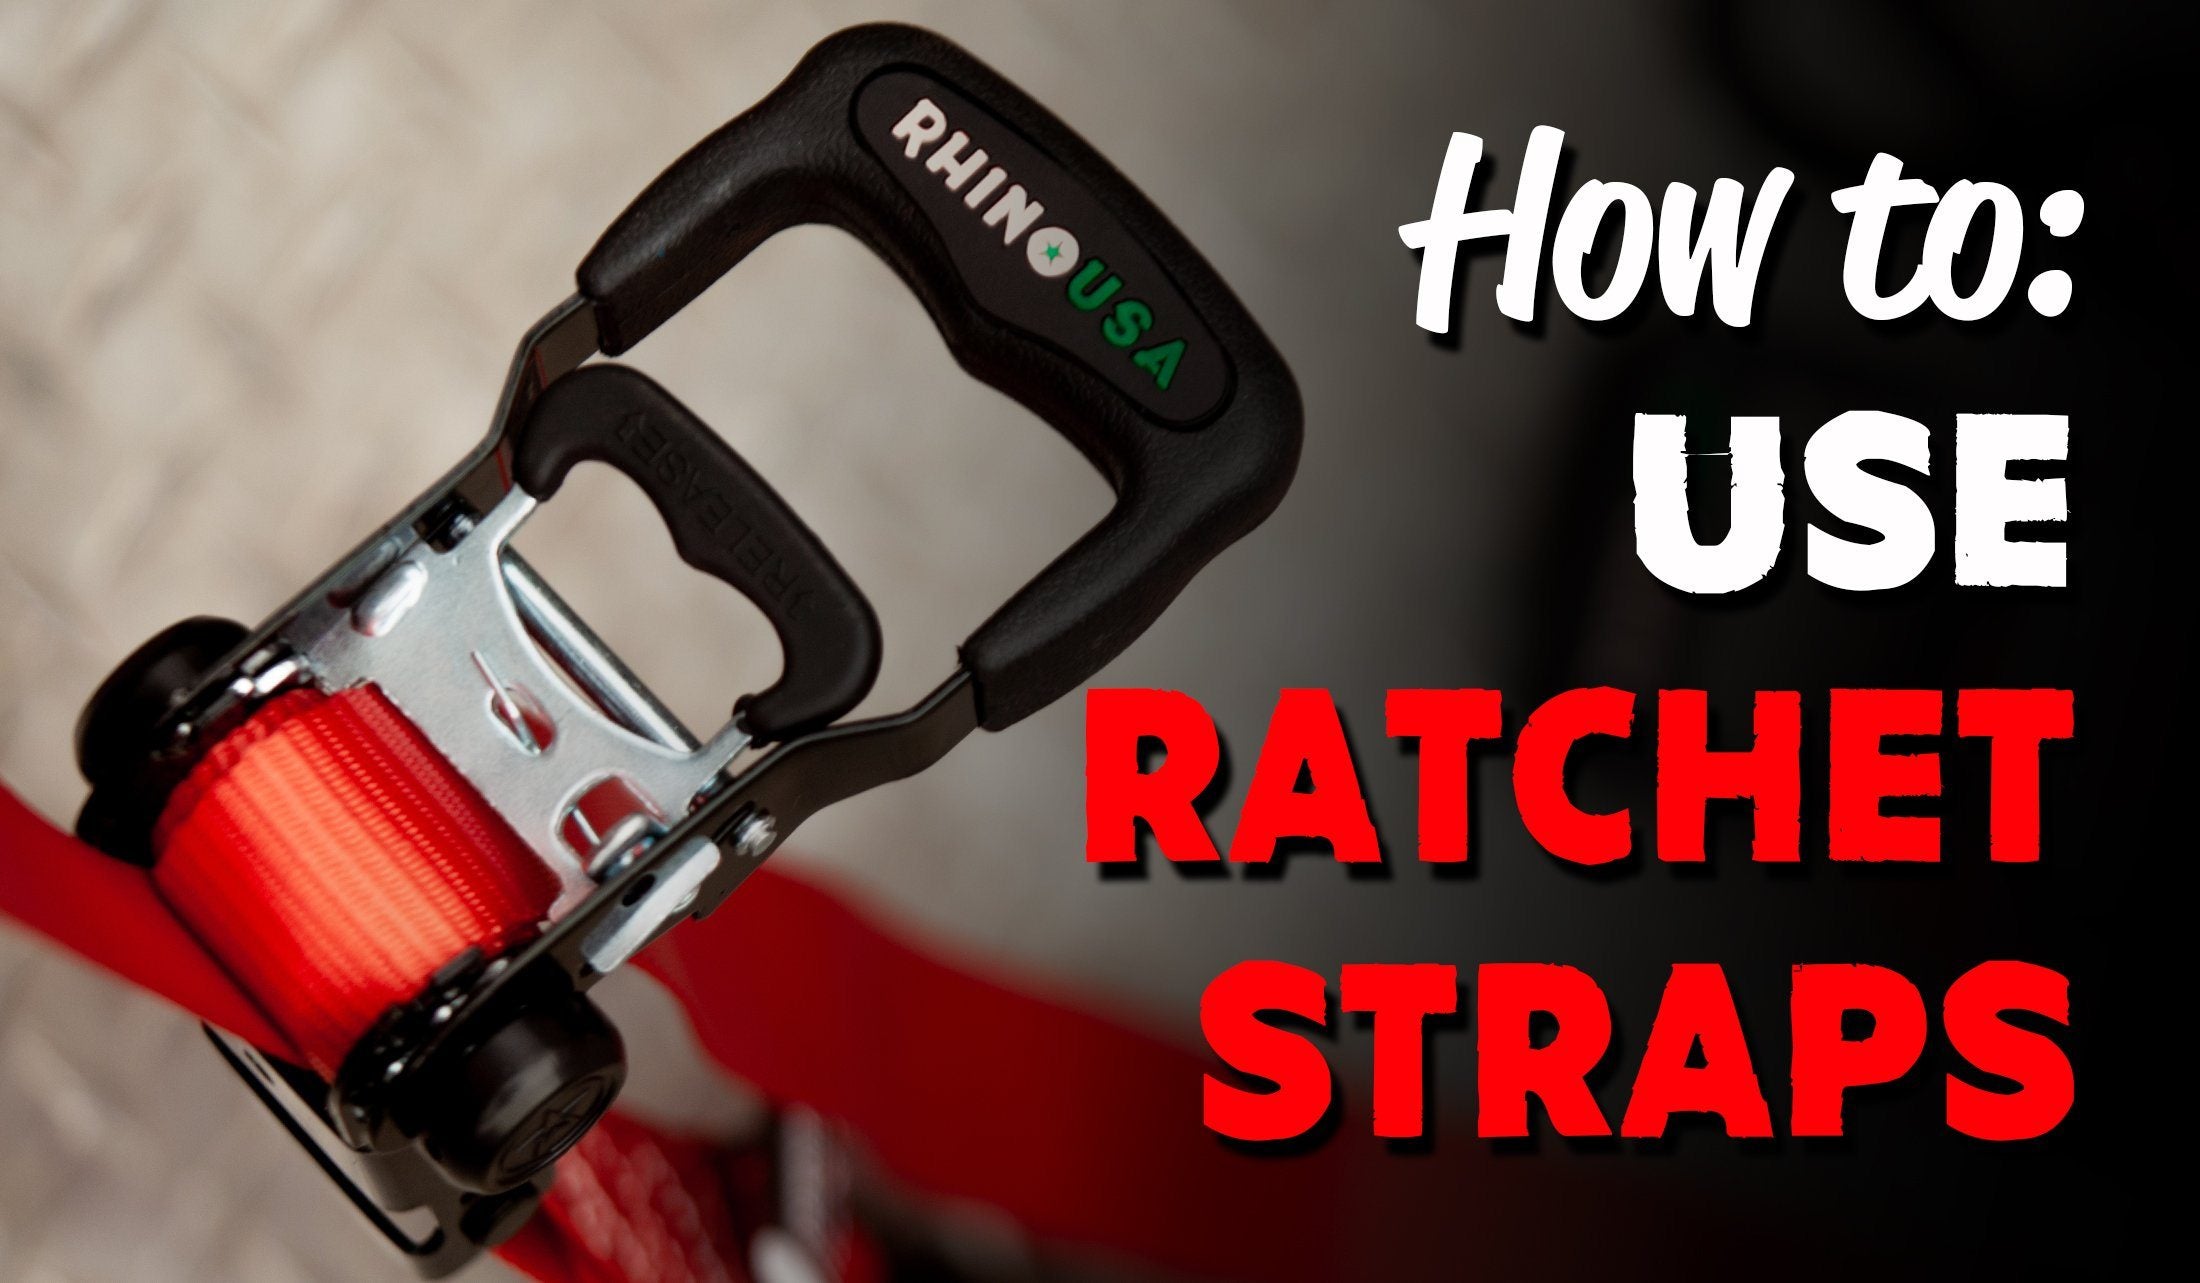 How to use Ratchet Straps in 3 Easy Steps!